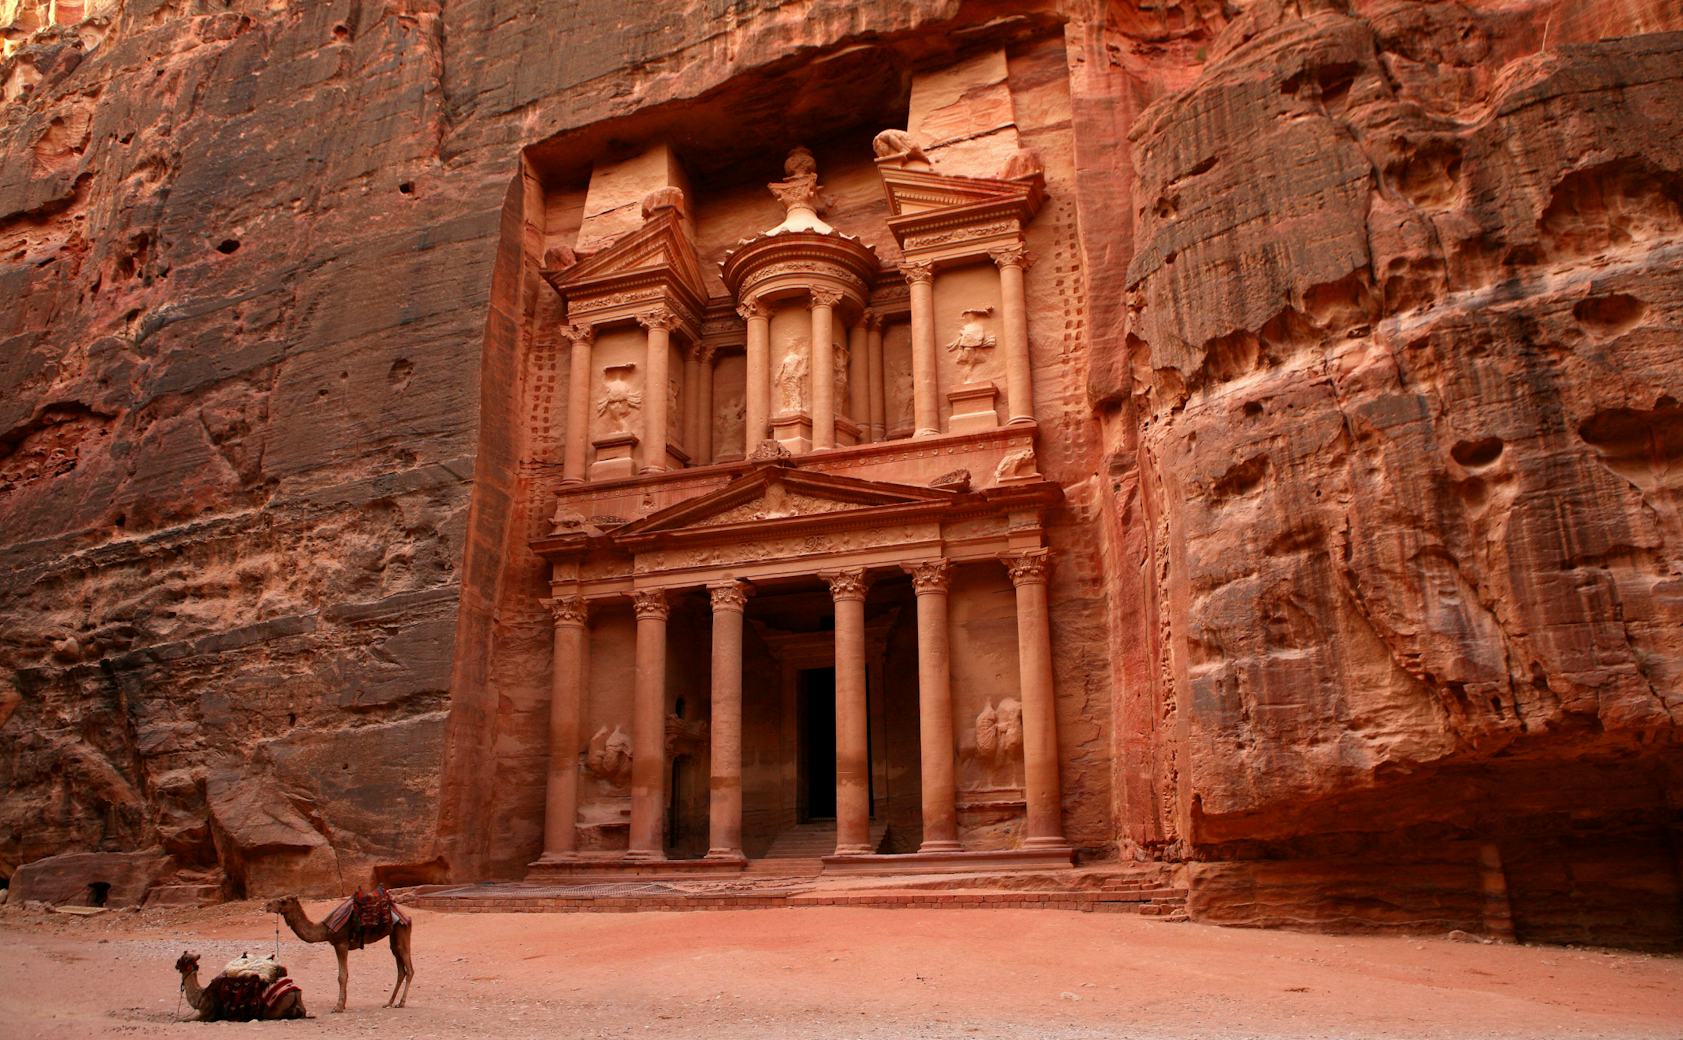 Petra during the day